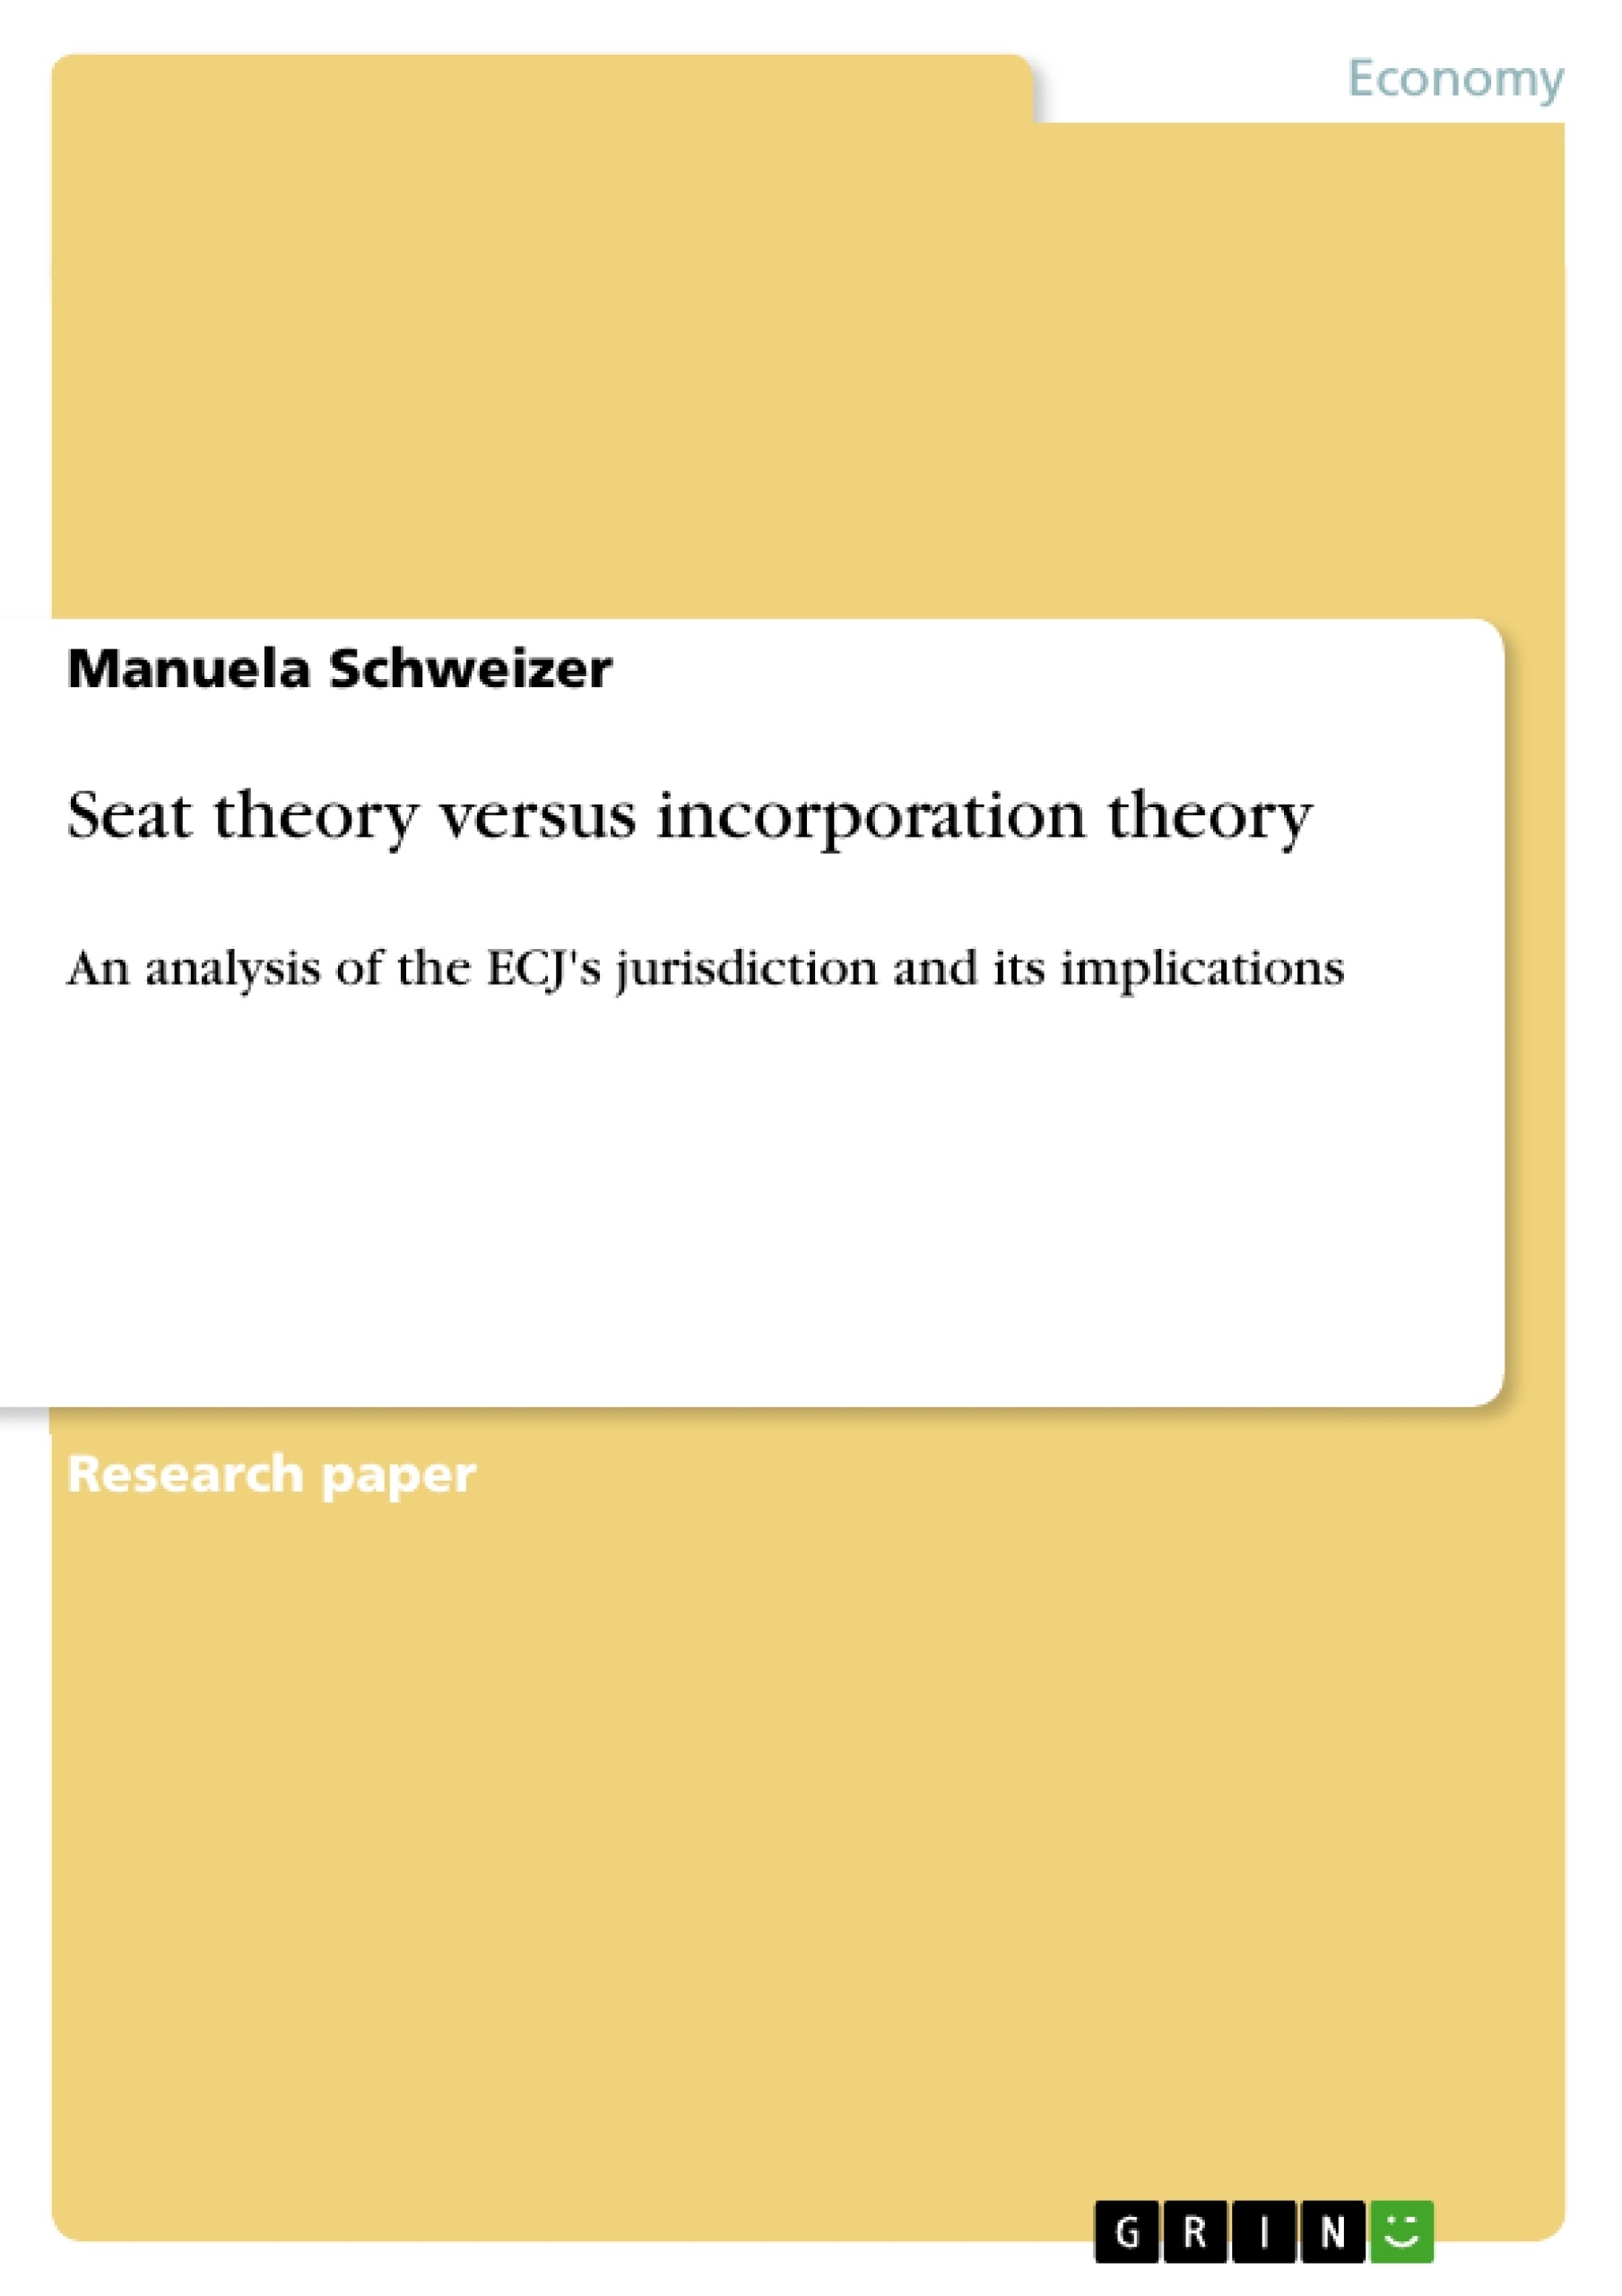 Title: Seat theory versus incorporation theory